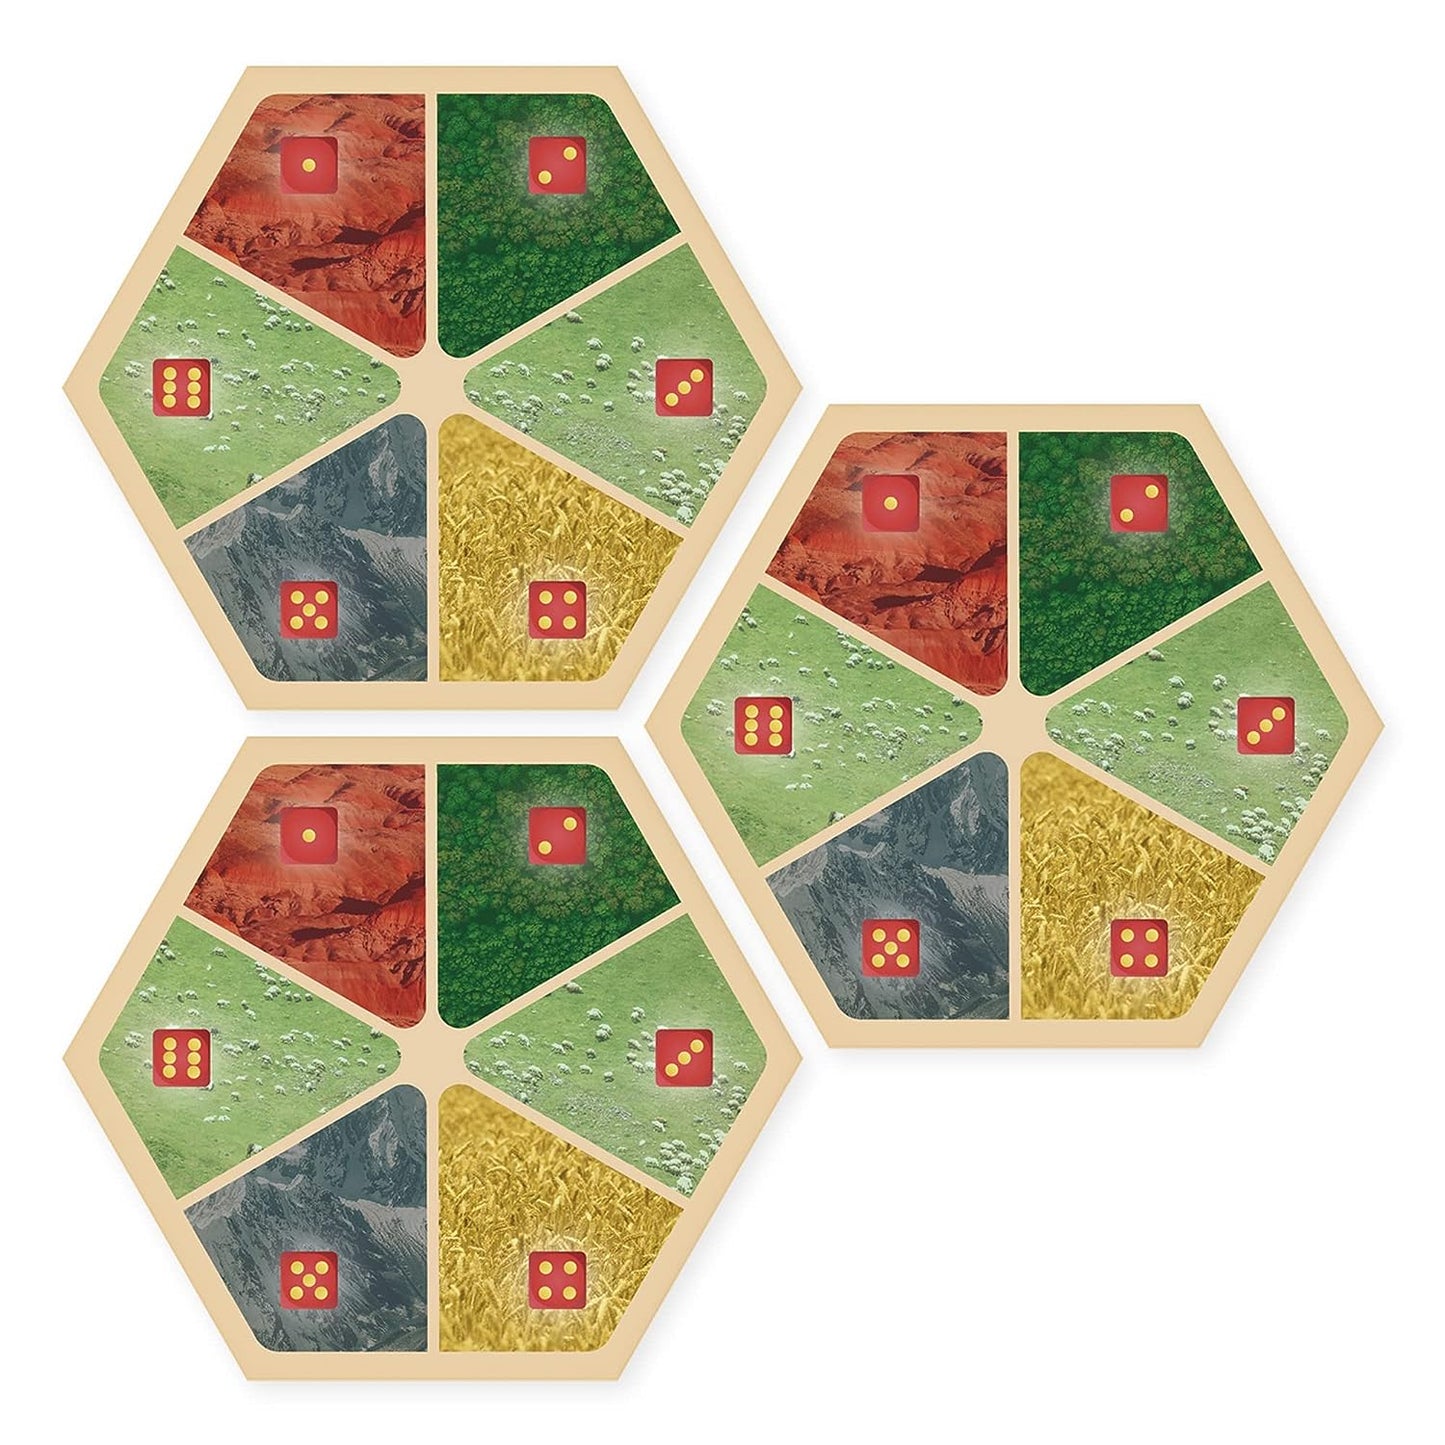 Amalgam Multi-Resource Replacement Hex Scenario compatible with Catan's Settlers of Catan, Seafarers, Cities and Knights and Catan Expansions